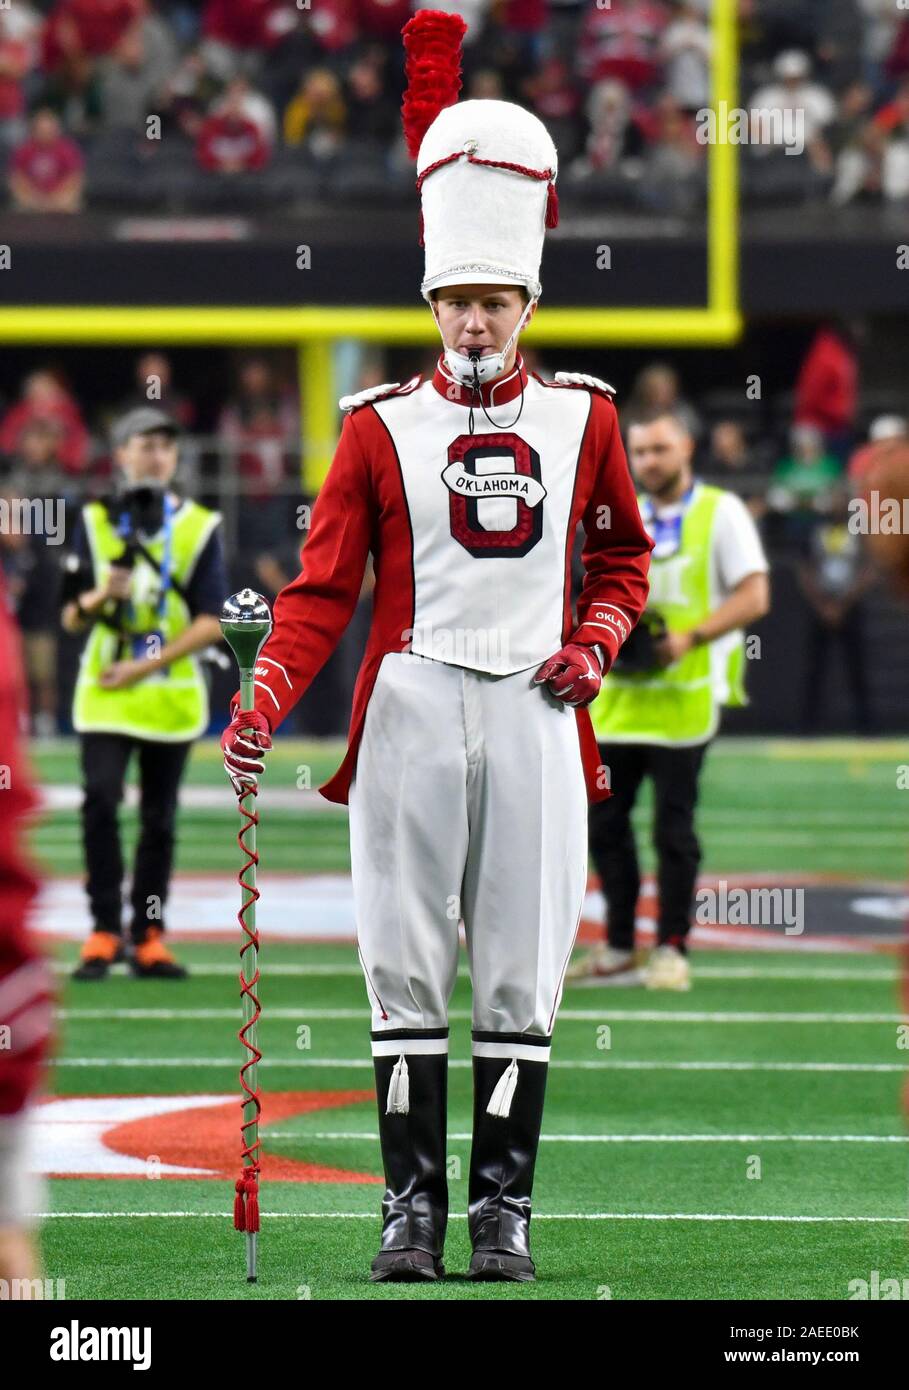 Dec 07, 2019: The Oklahoma drum major during the NCAA Big 12 Championship game between the Baylor University Bears and the University of Oklahoma Sooners at AT&T Stadium in Arlington, TX Oklahoma defeated Baylor 30-23 in Overtime Albert Pena/CSM Stock Photo